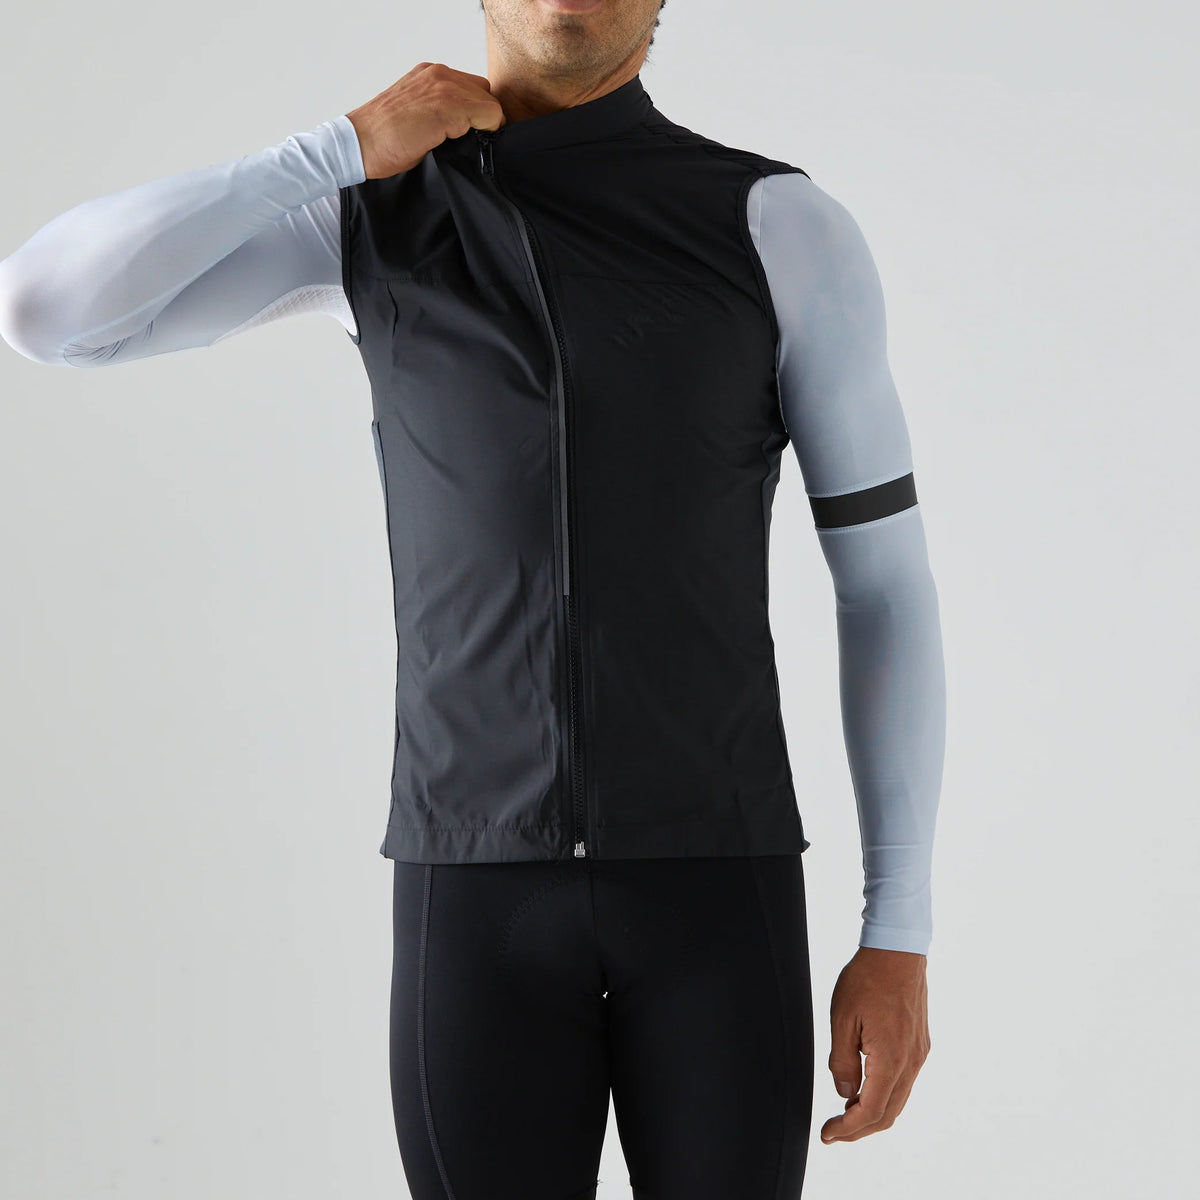 Givelo Quick-Free Gilet Black メンズ サイクルジレ | GEARED